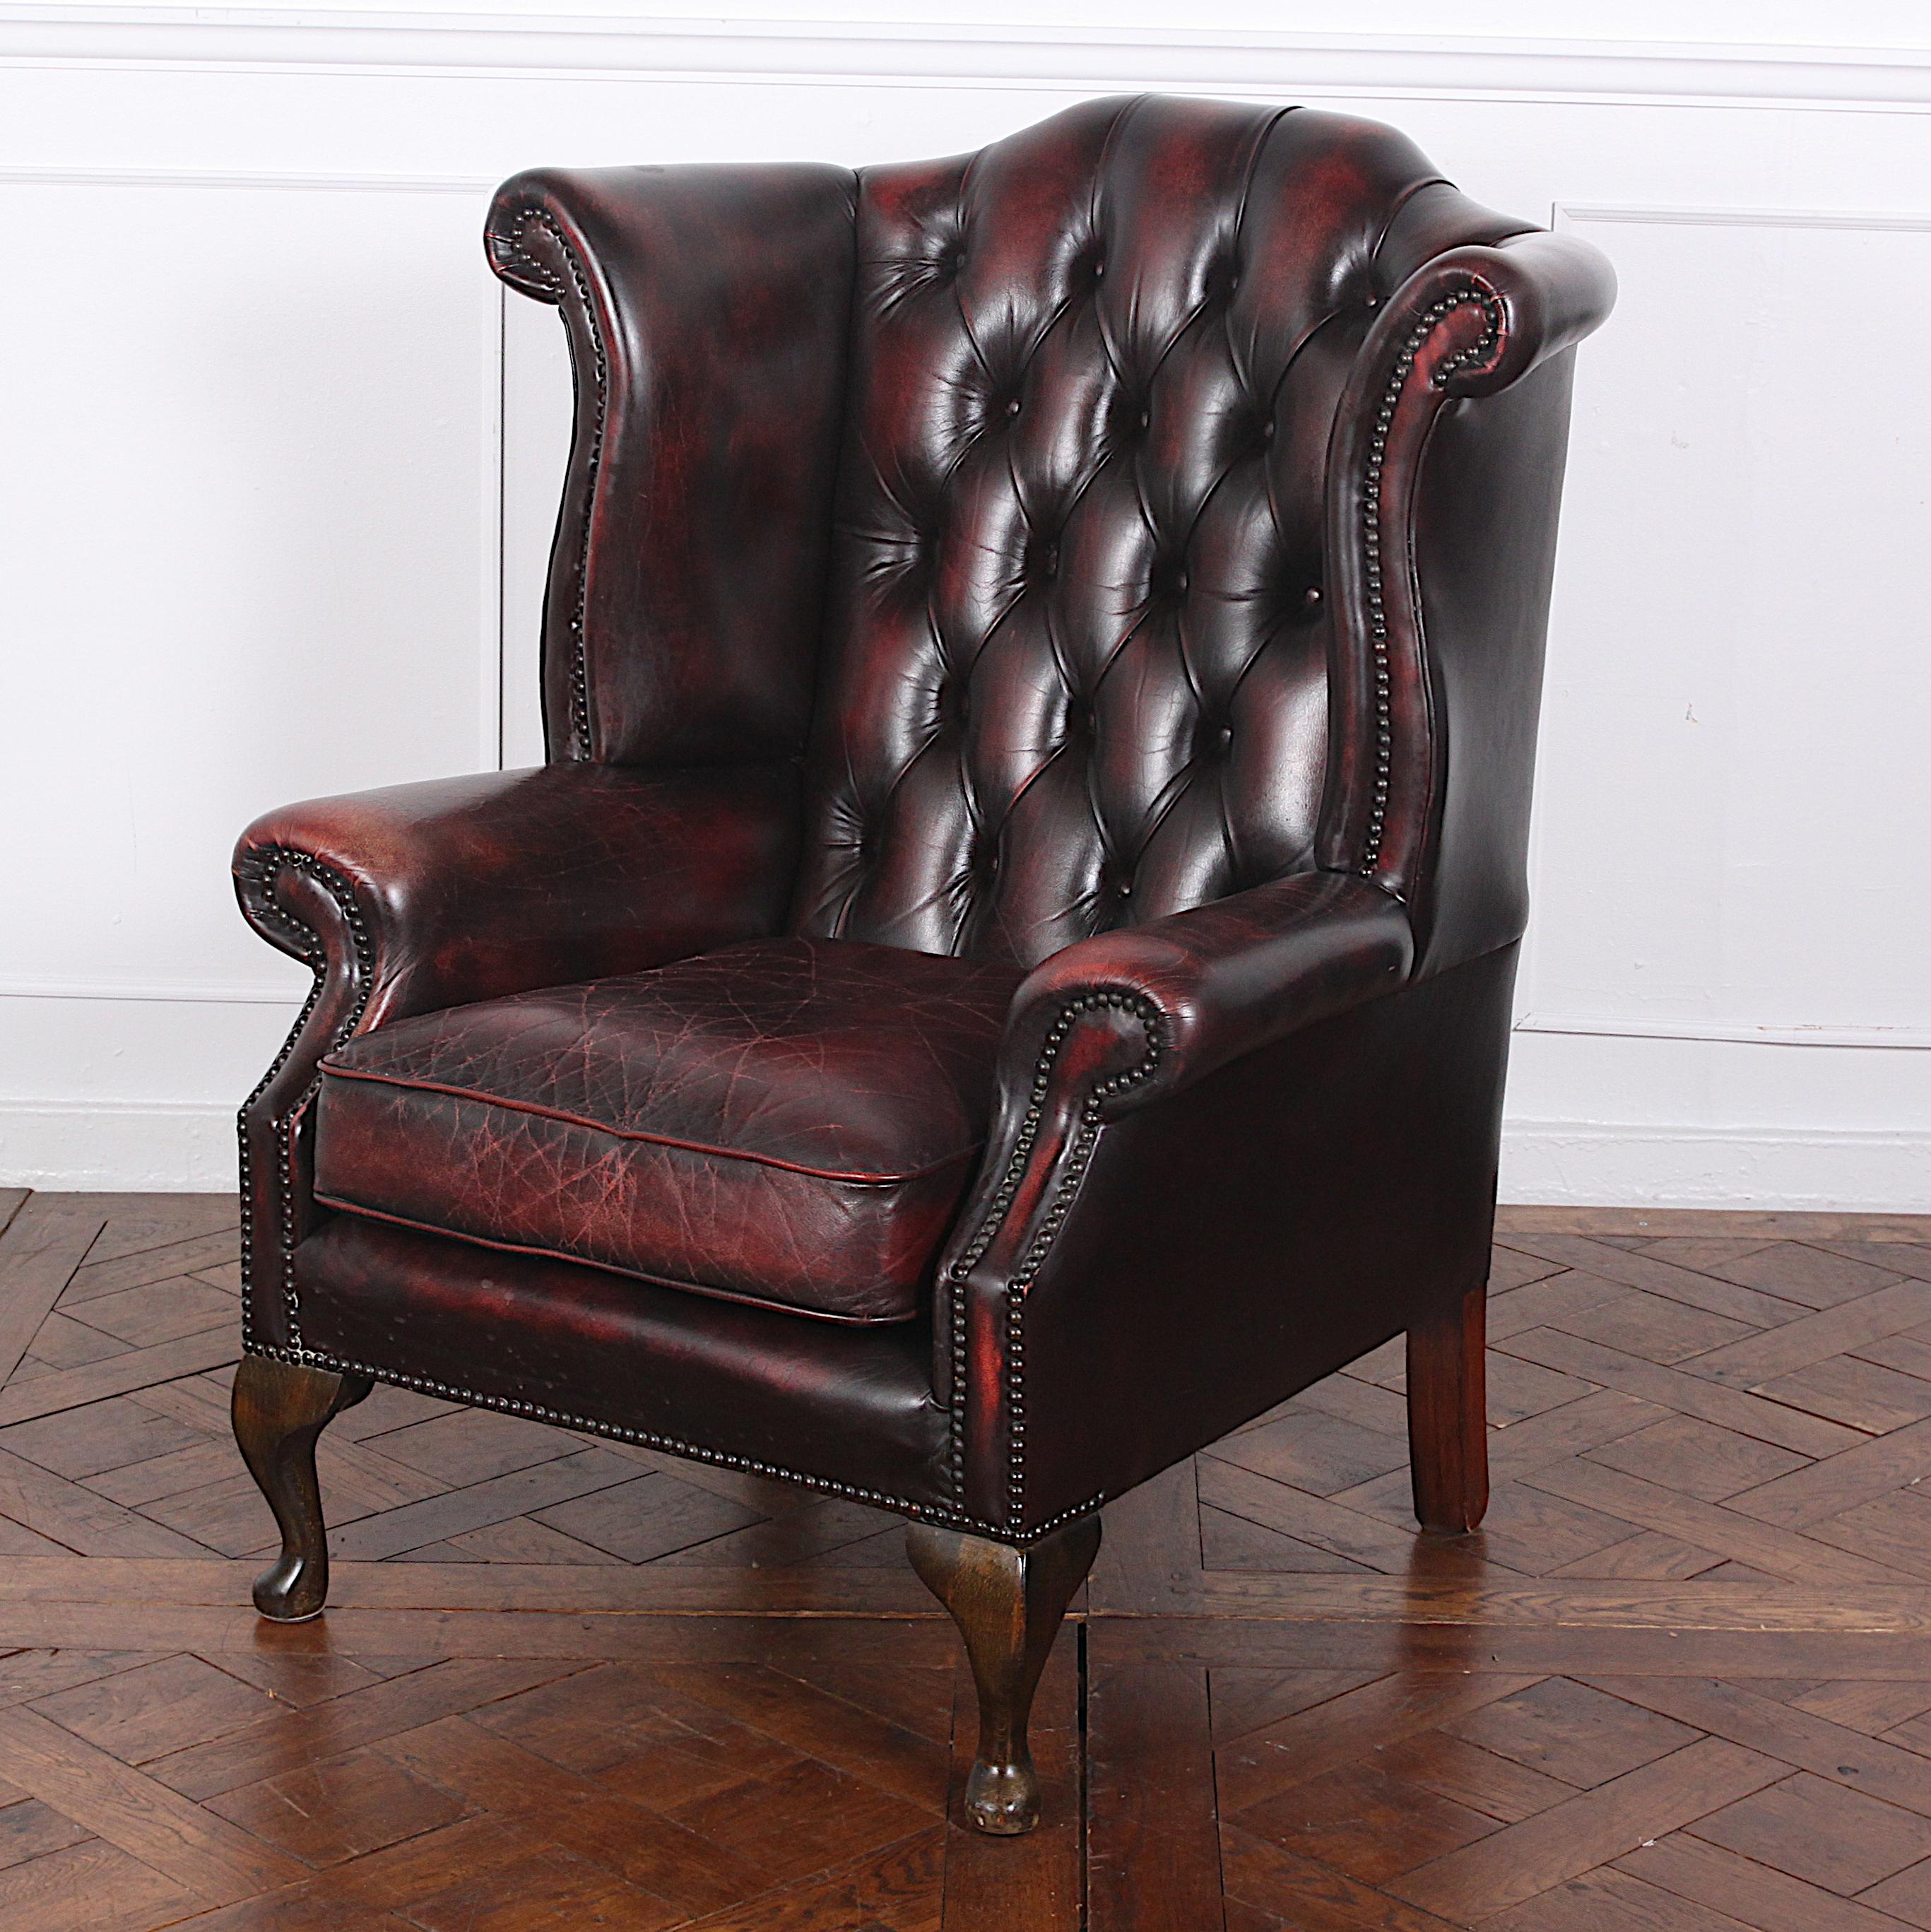 Classic and Elegant British Leather Wingback Chair In Good Condition In Vancouver, British Columbia